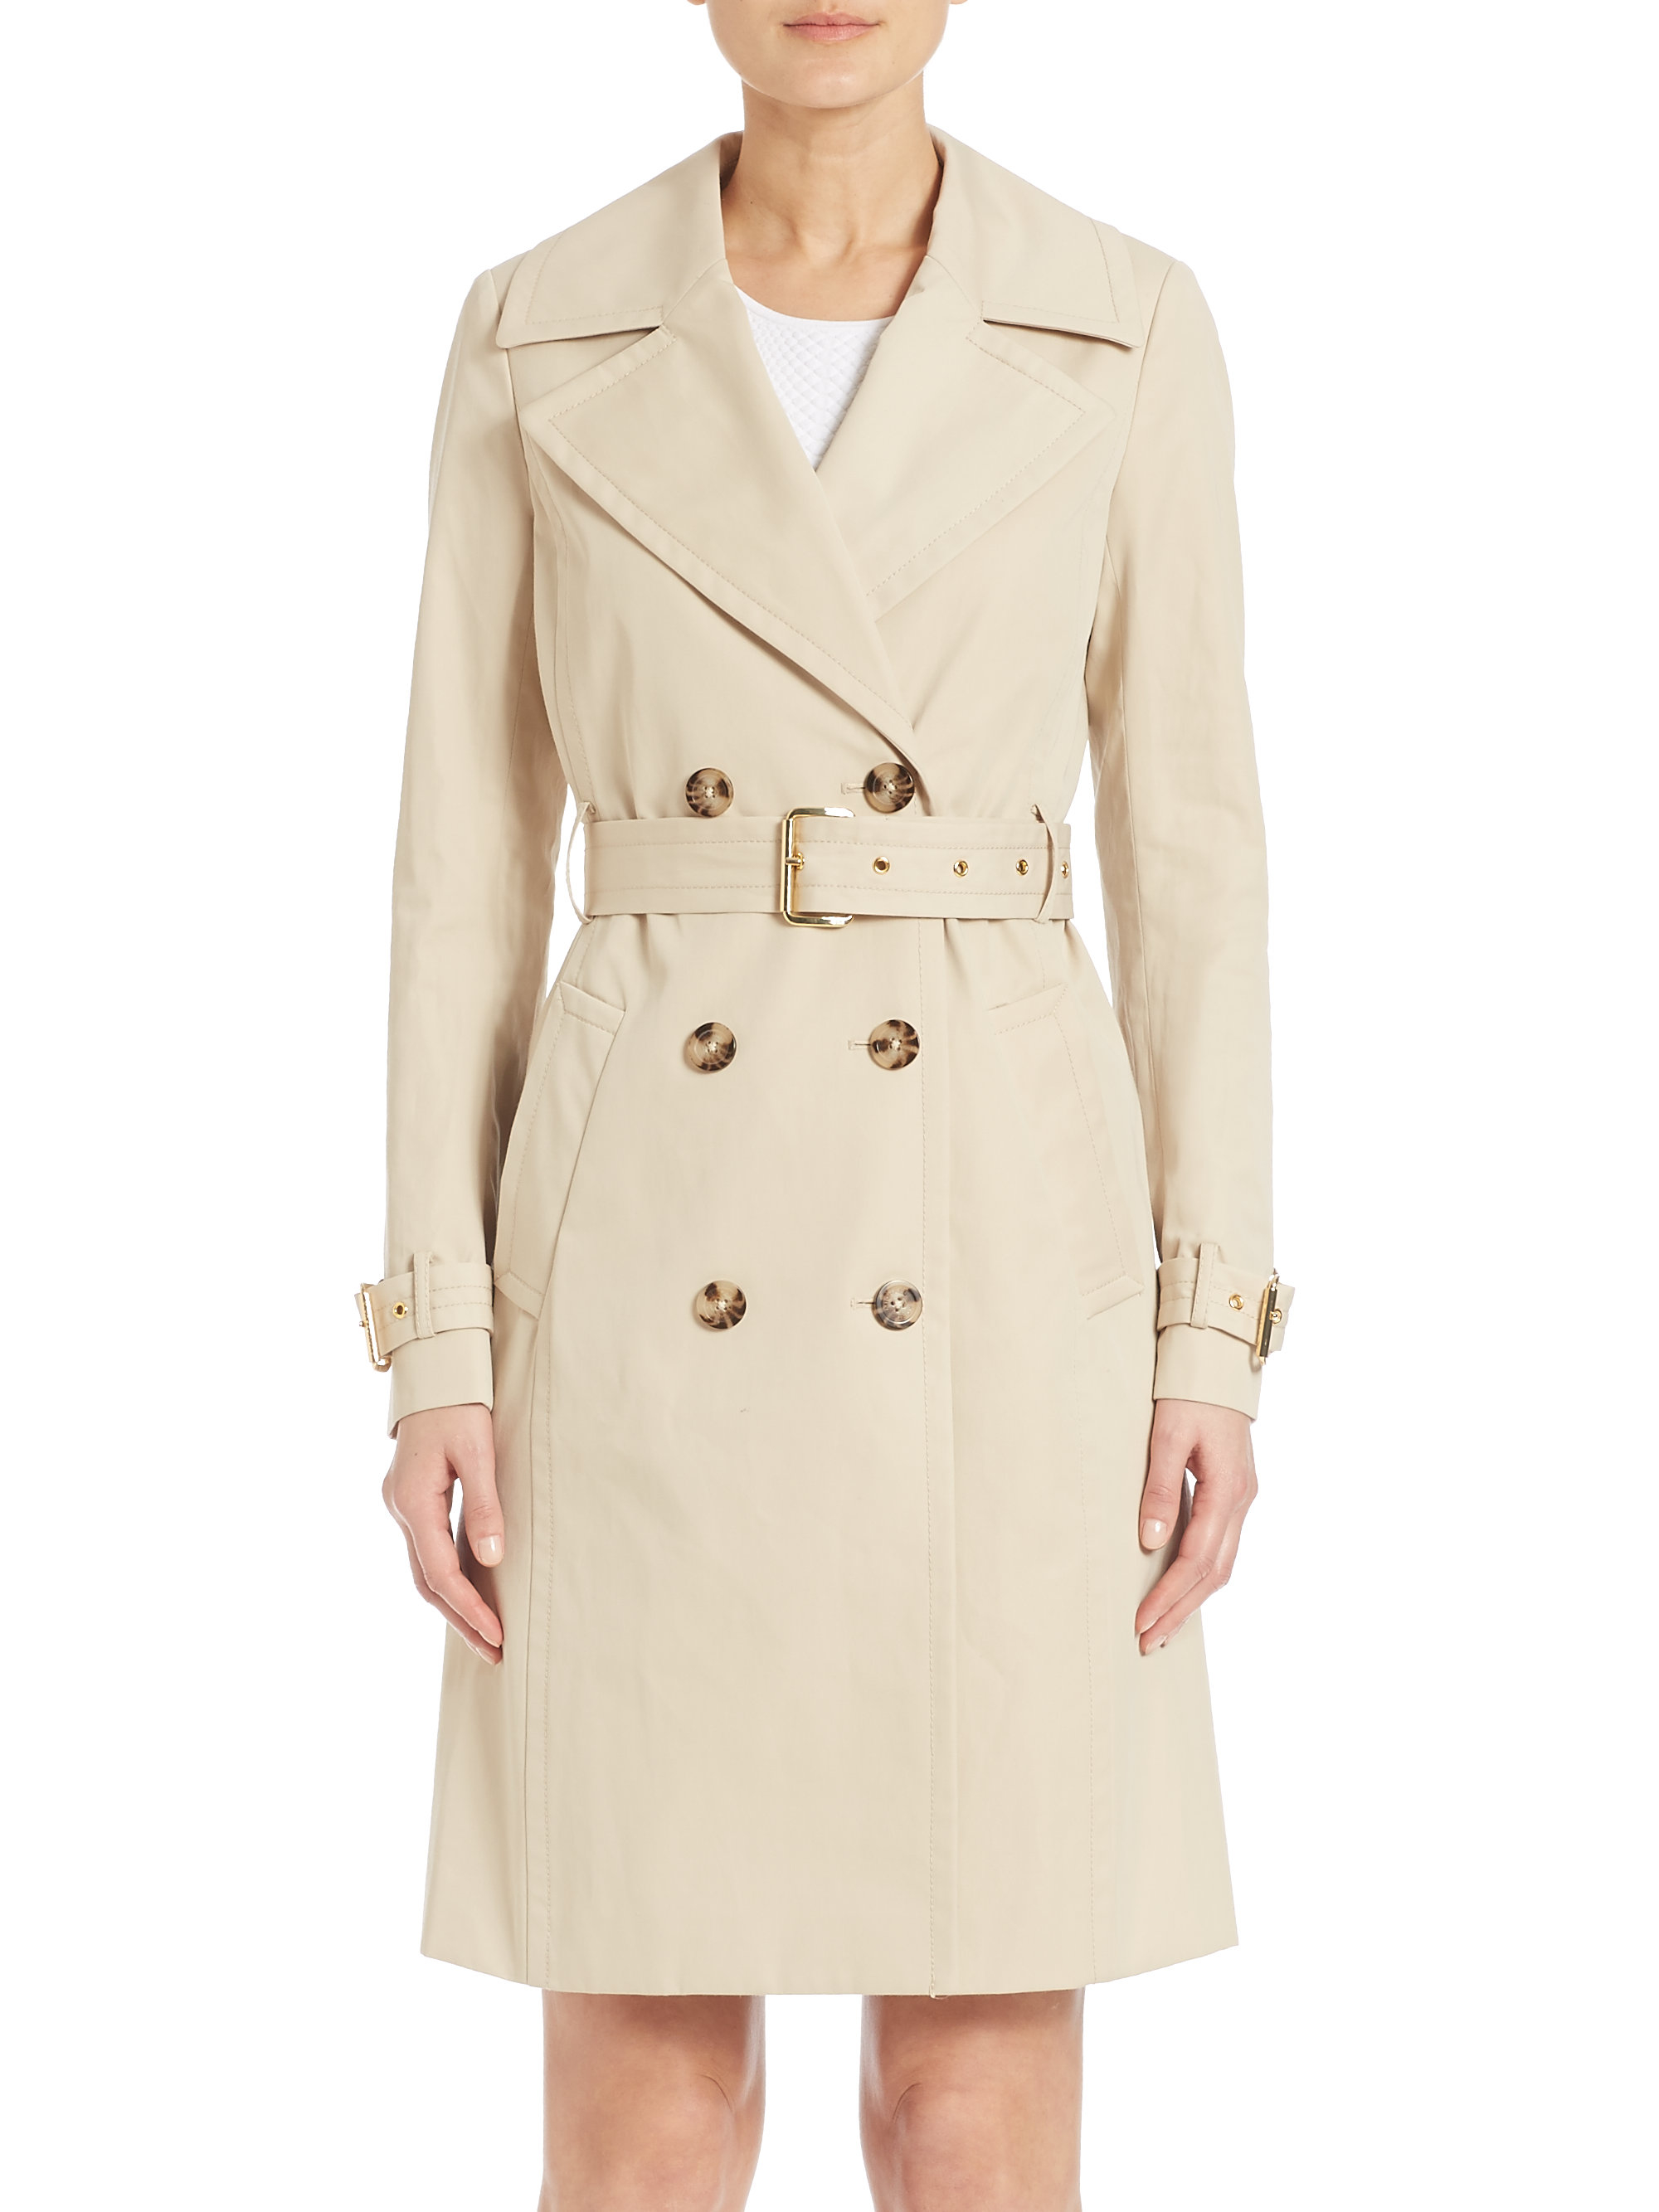 Lyst - Michael Michael Kors A-line Trenchcoat in Natural